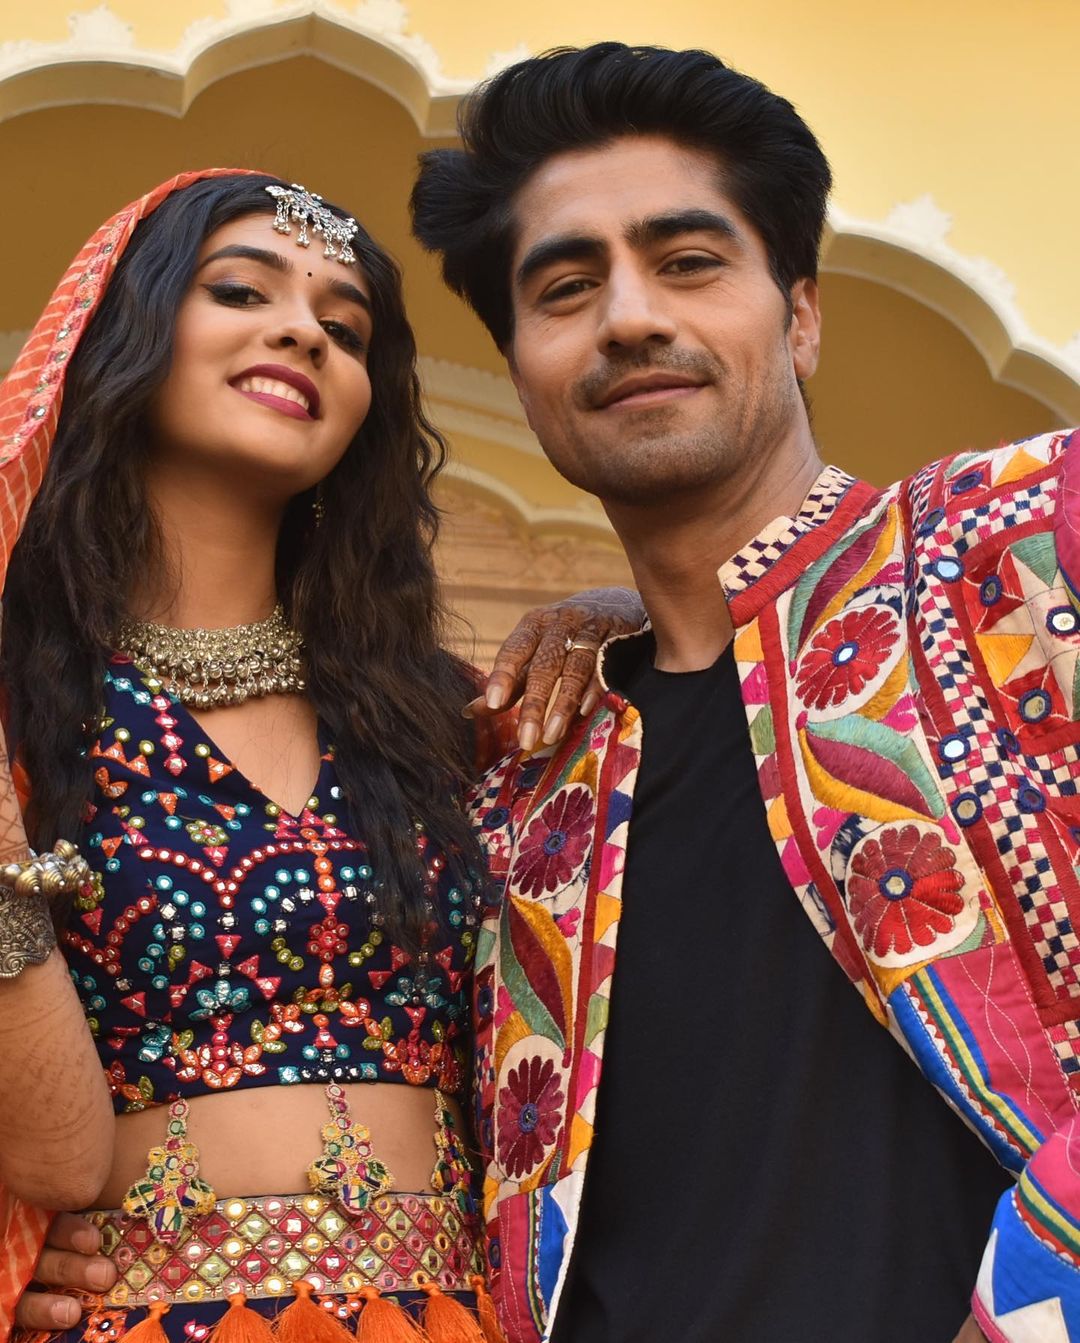 Harshad Chopda And Pranali Rathod Are The New Hottest Lovebirds In Town